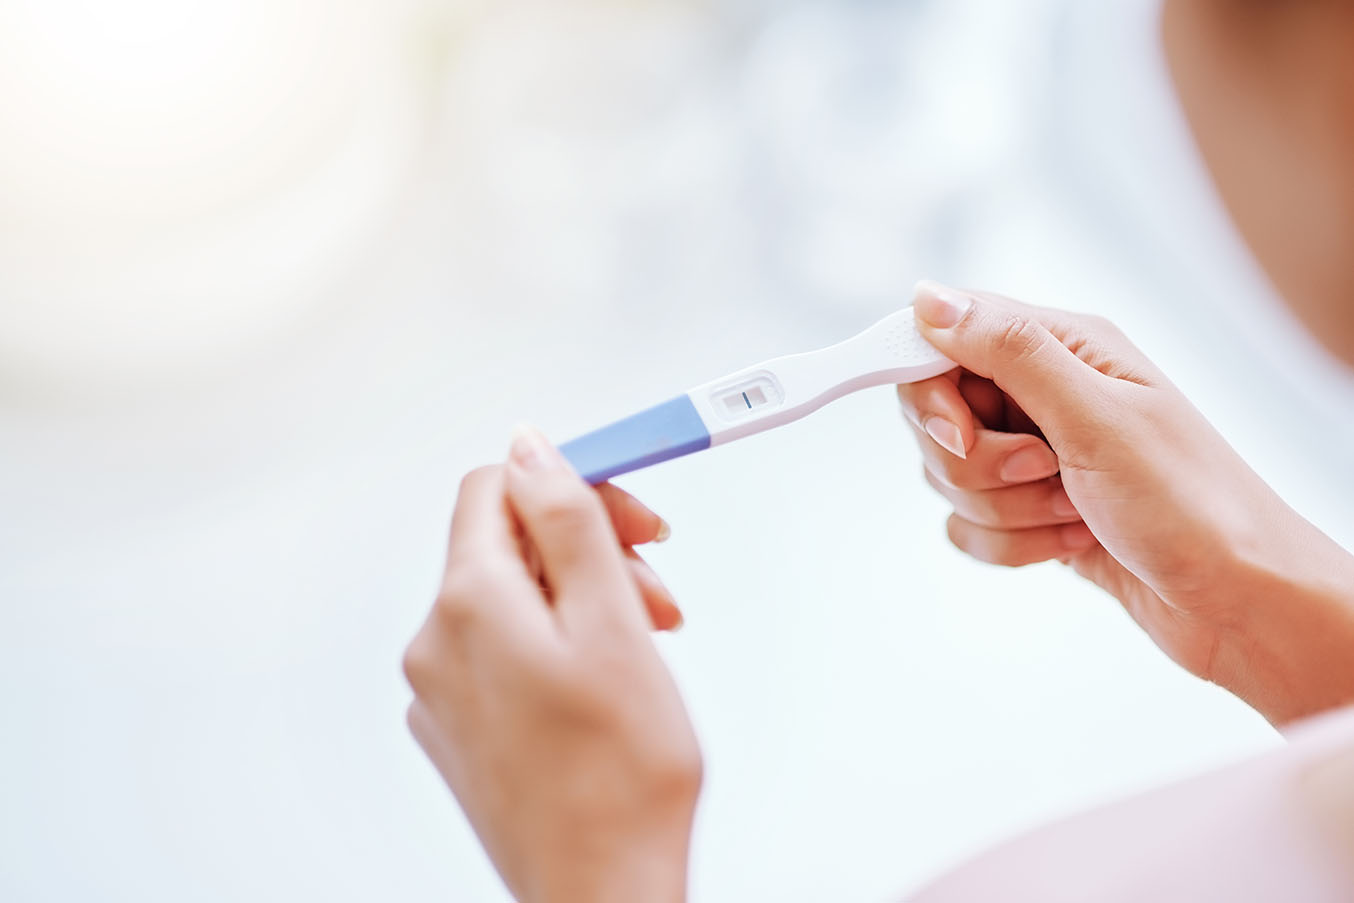 A woman looks down at a pregnancy test in her hands.